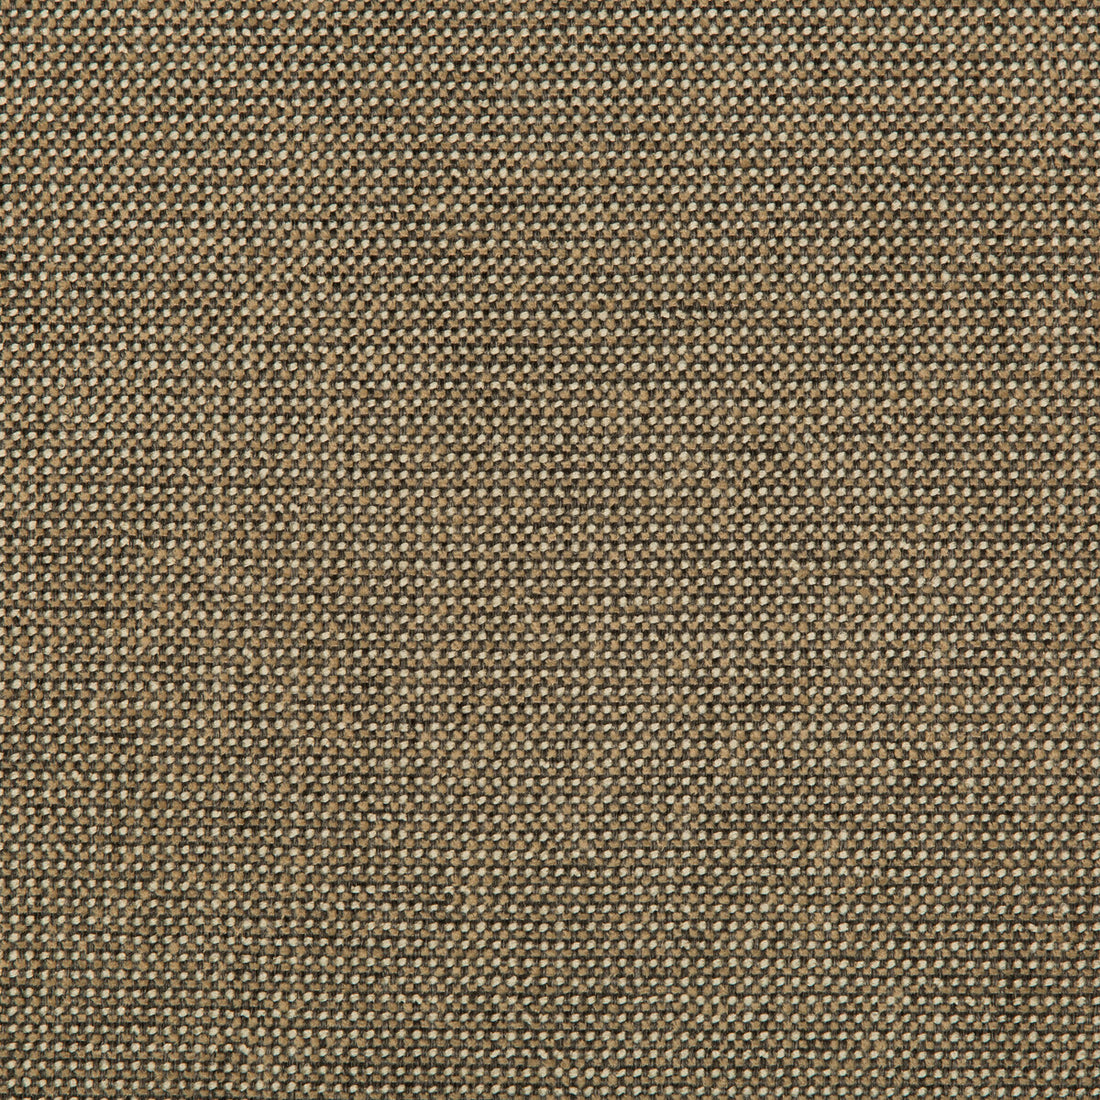 Burr fabric in pecan color - pattern 35745.816.0 - by Kravet Contract in the Value Kravetarmor collection